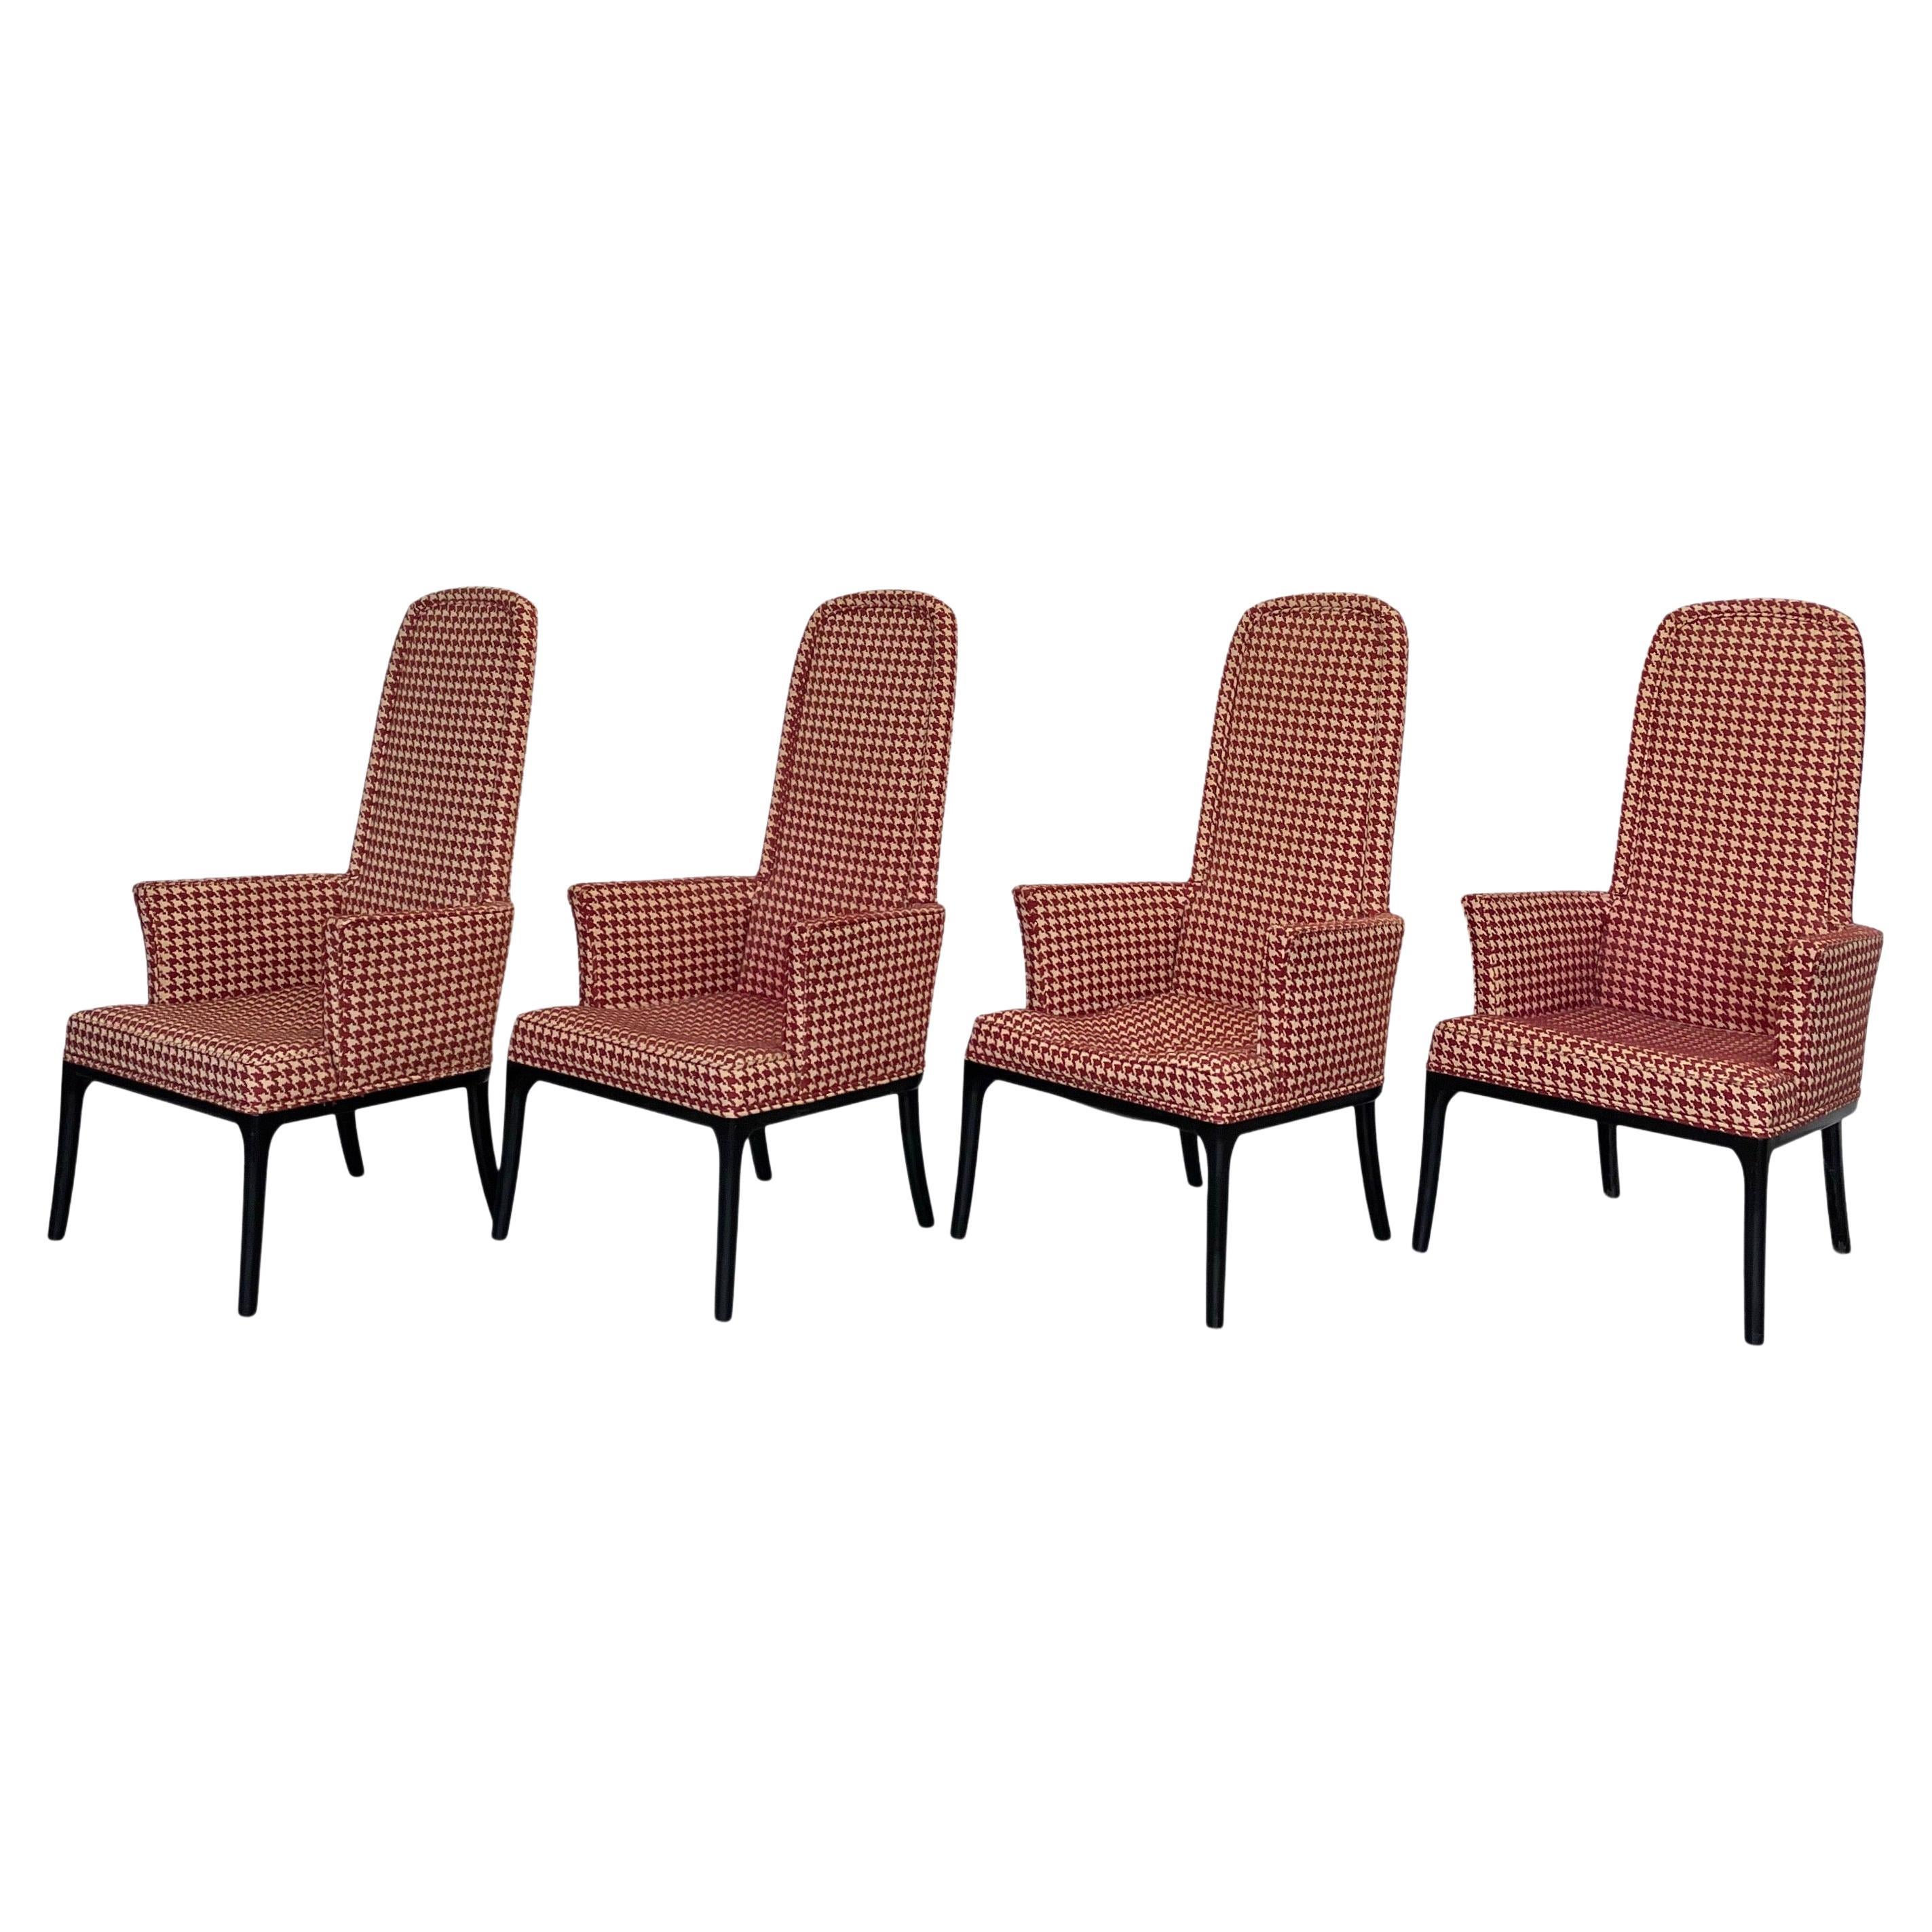 Set of Four High Back Armchair-Dining Chair by Erwin Lambeth for Tomlinson For Sale